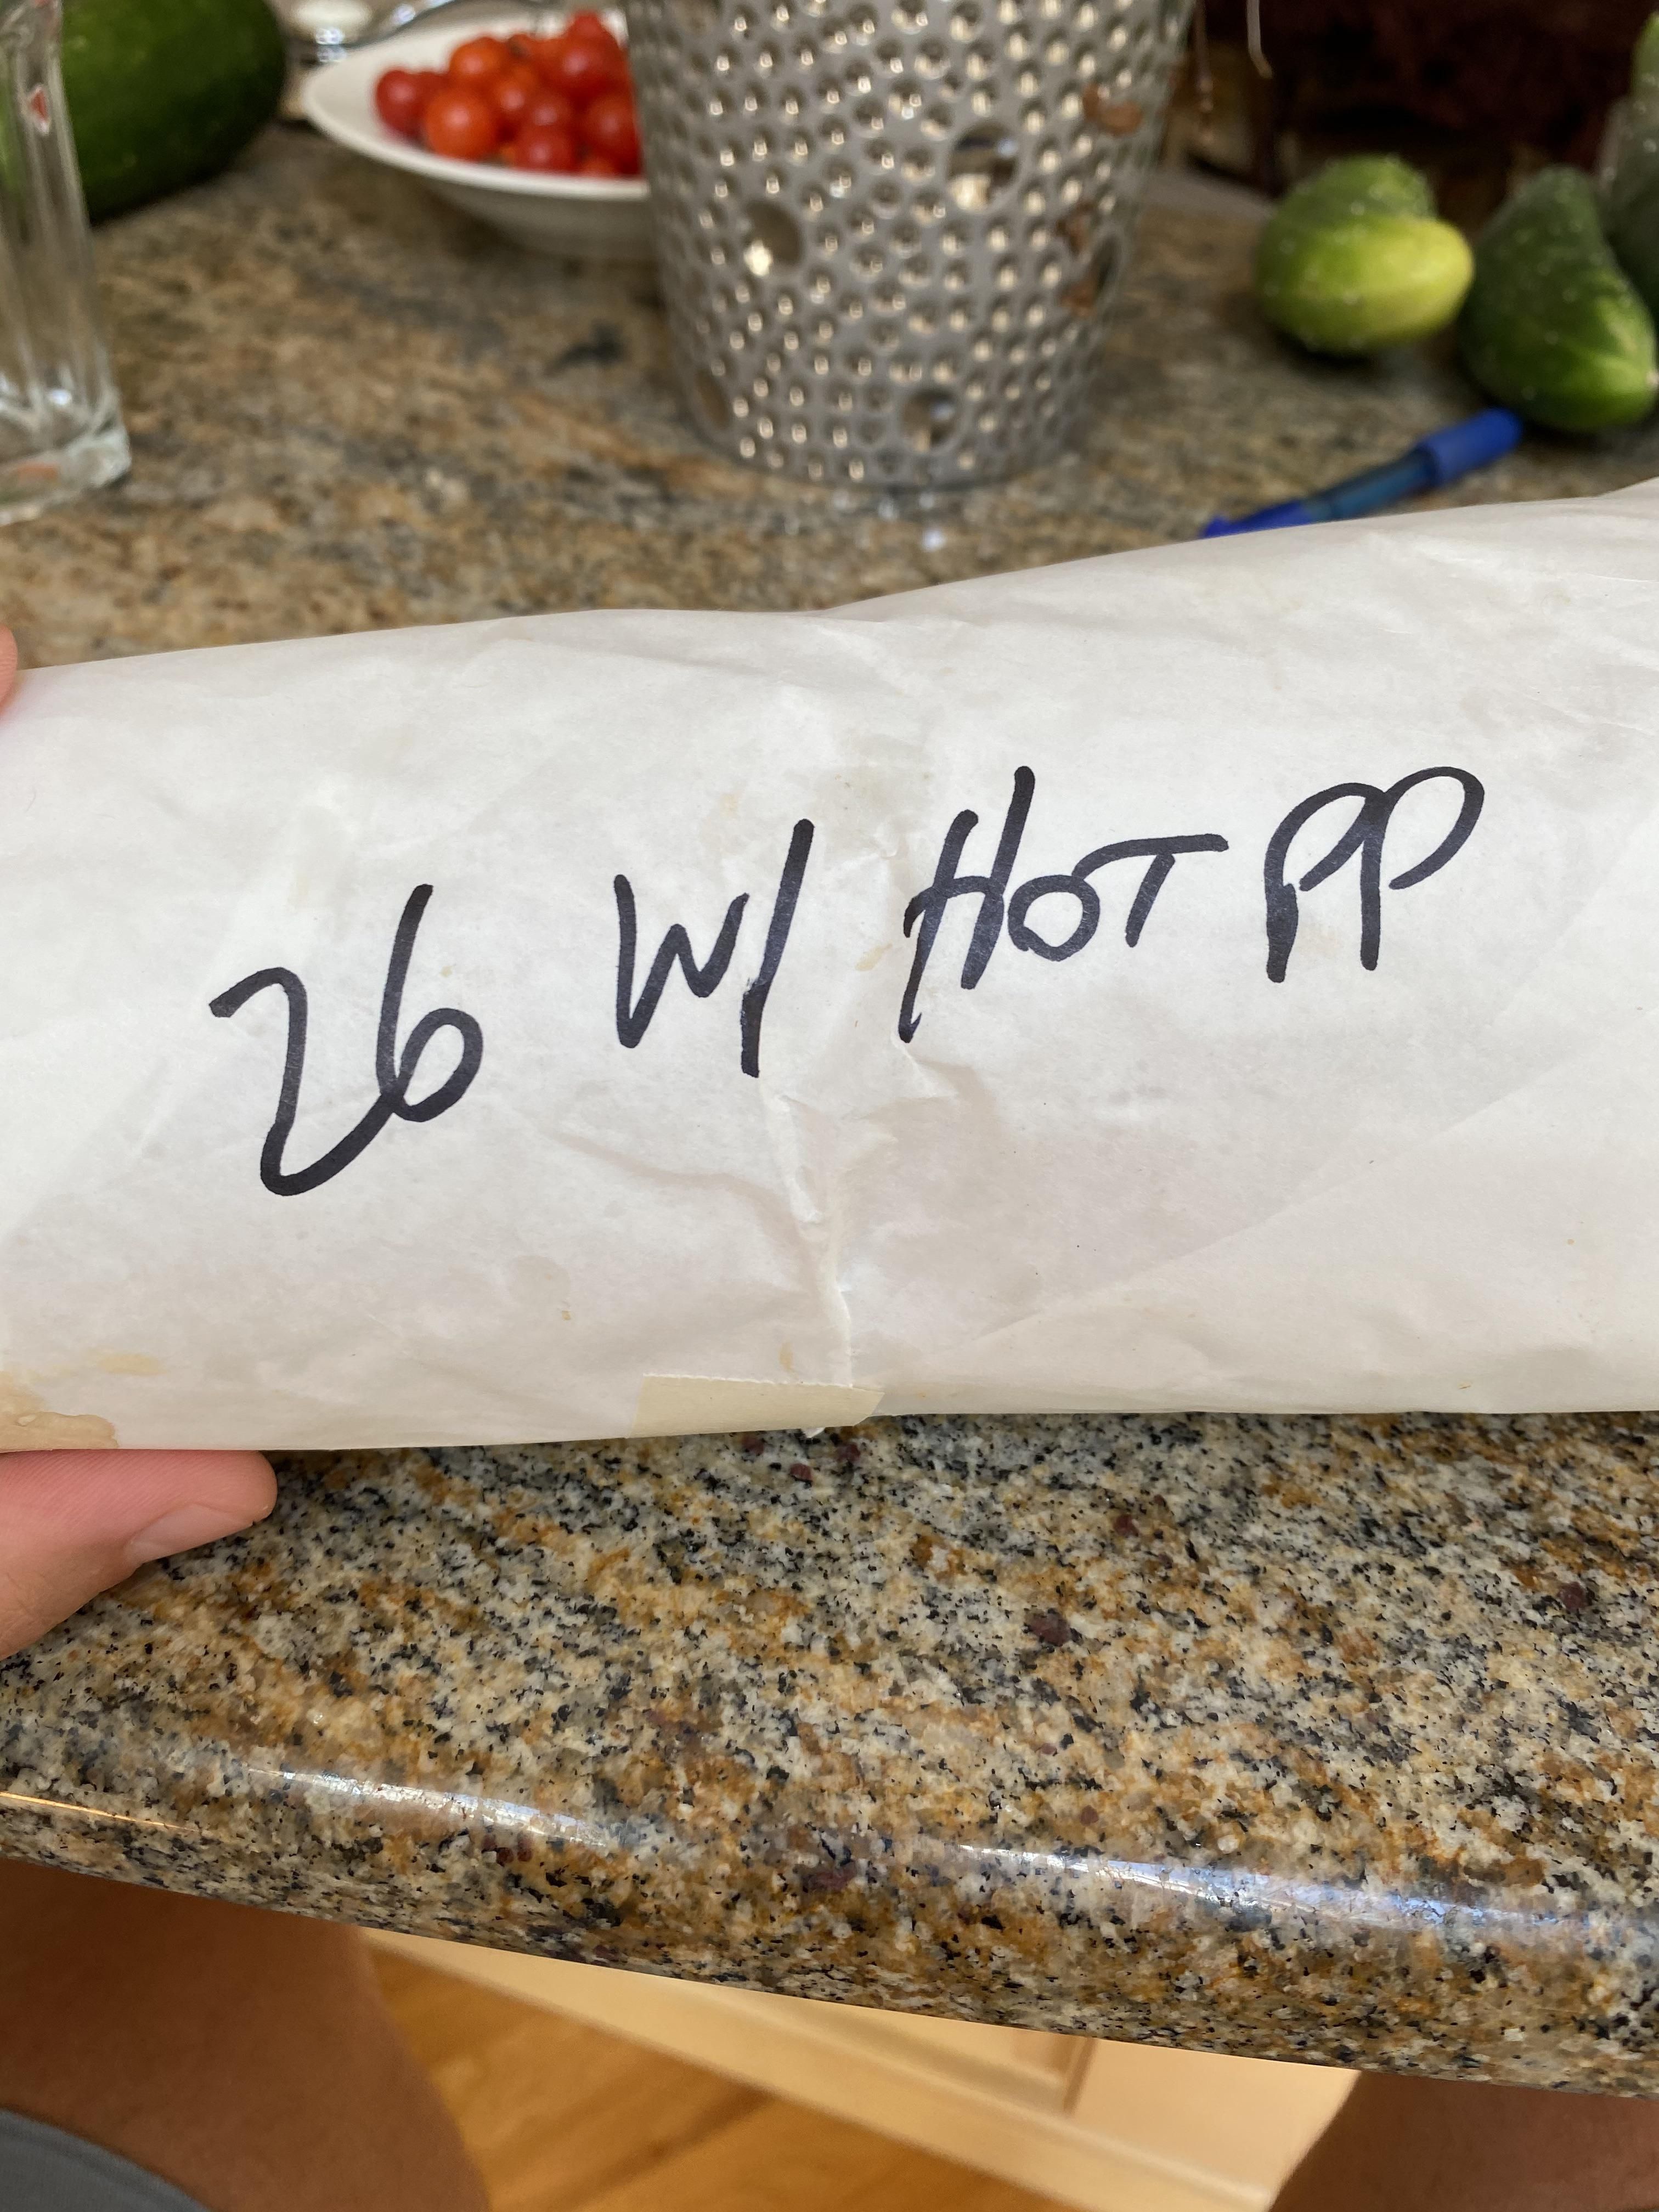 I think the sandwich lady is coming on to me